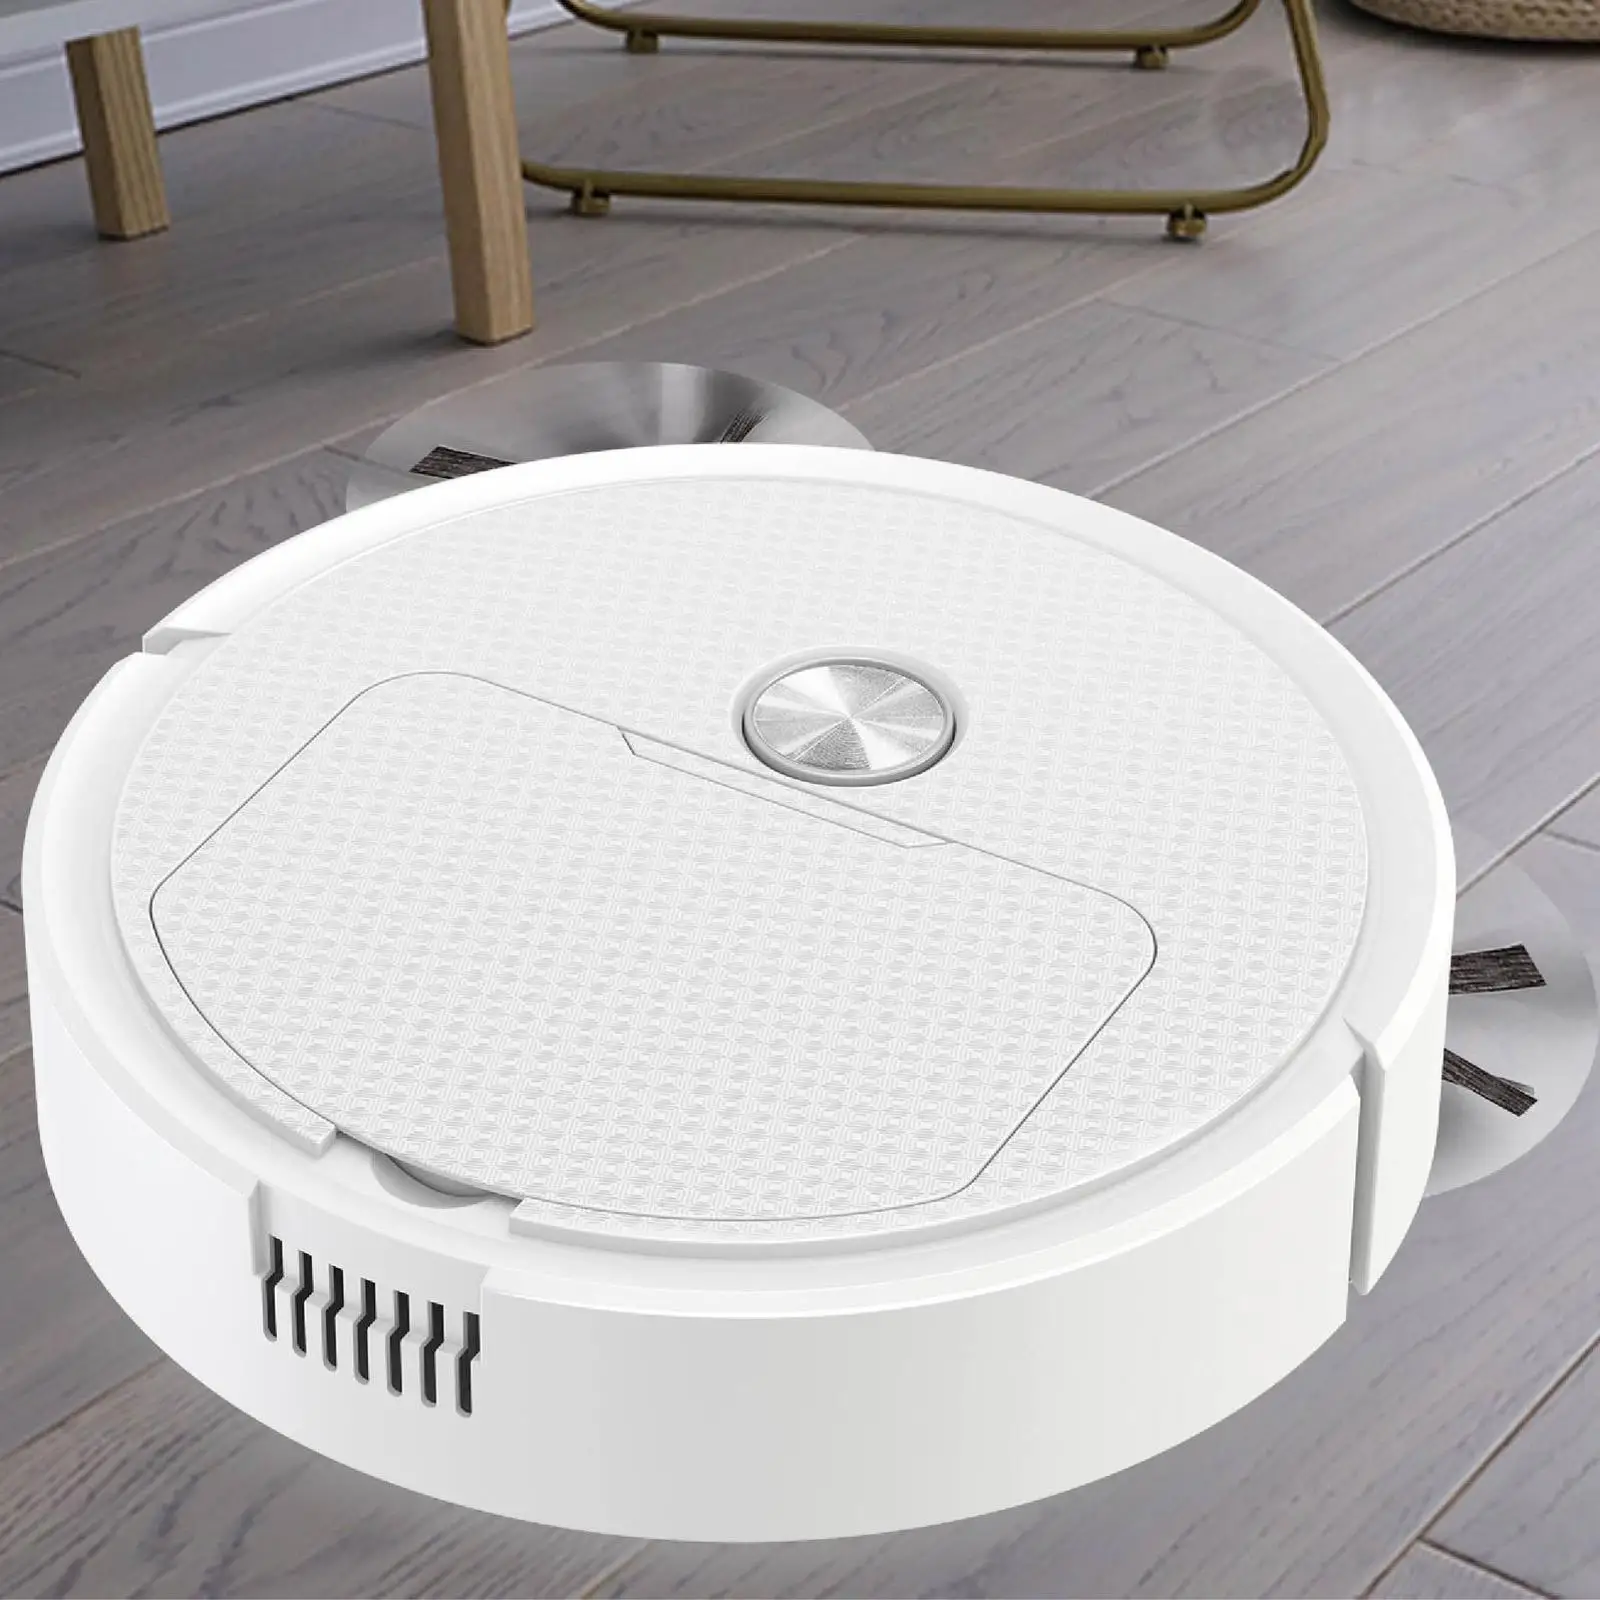  Robot Vacuum Cleaner High Efficient Suction Sweep  Noise Compact USB Charging Automatic Vacuum Cleaner  Wood Tile